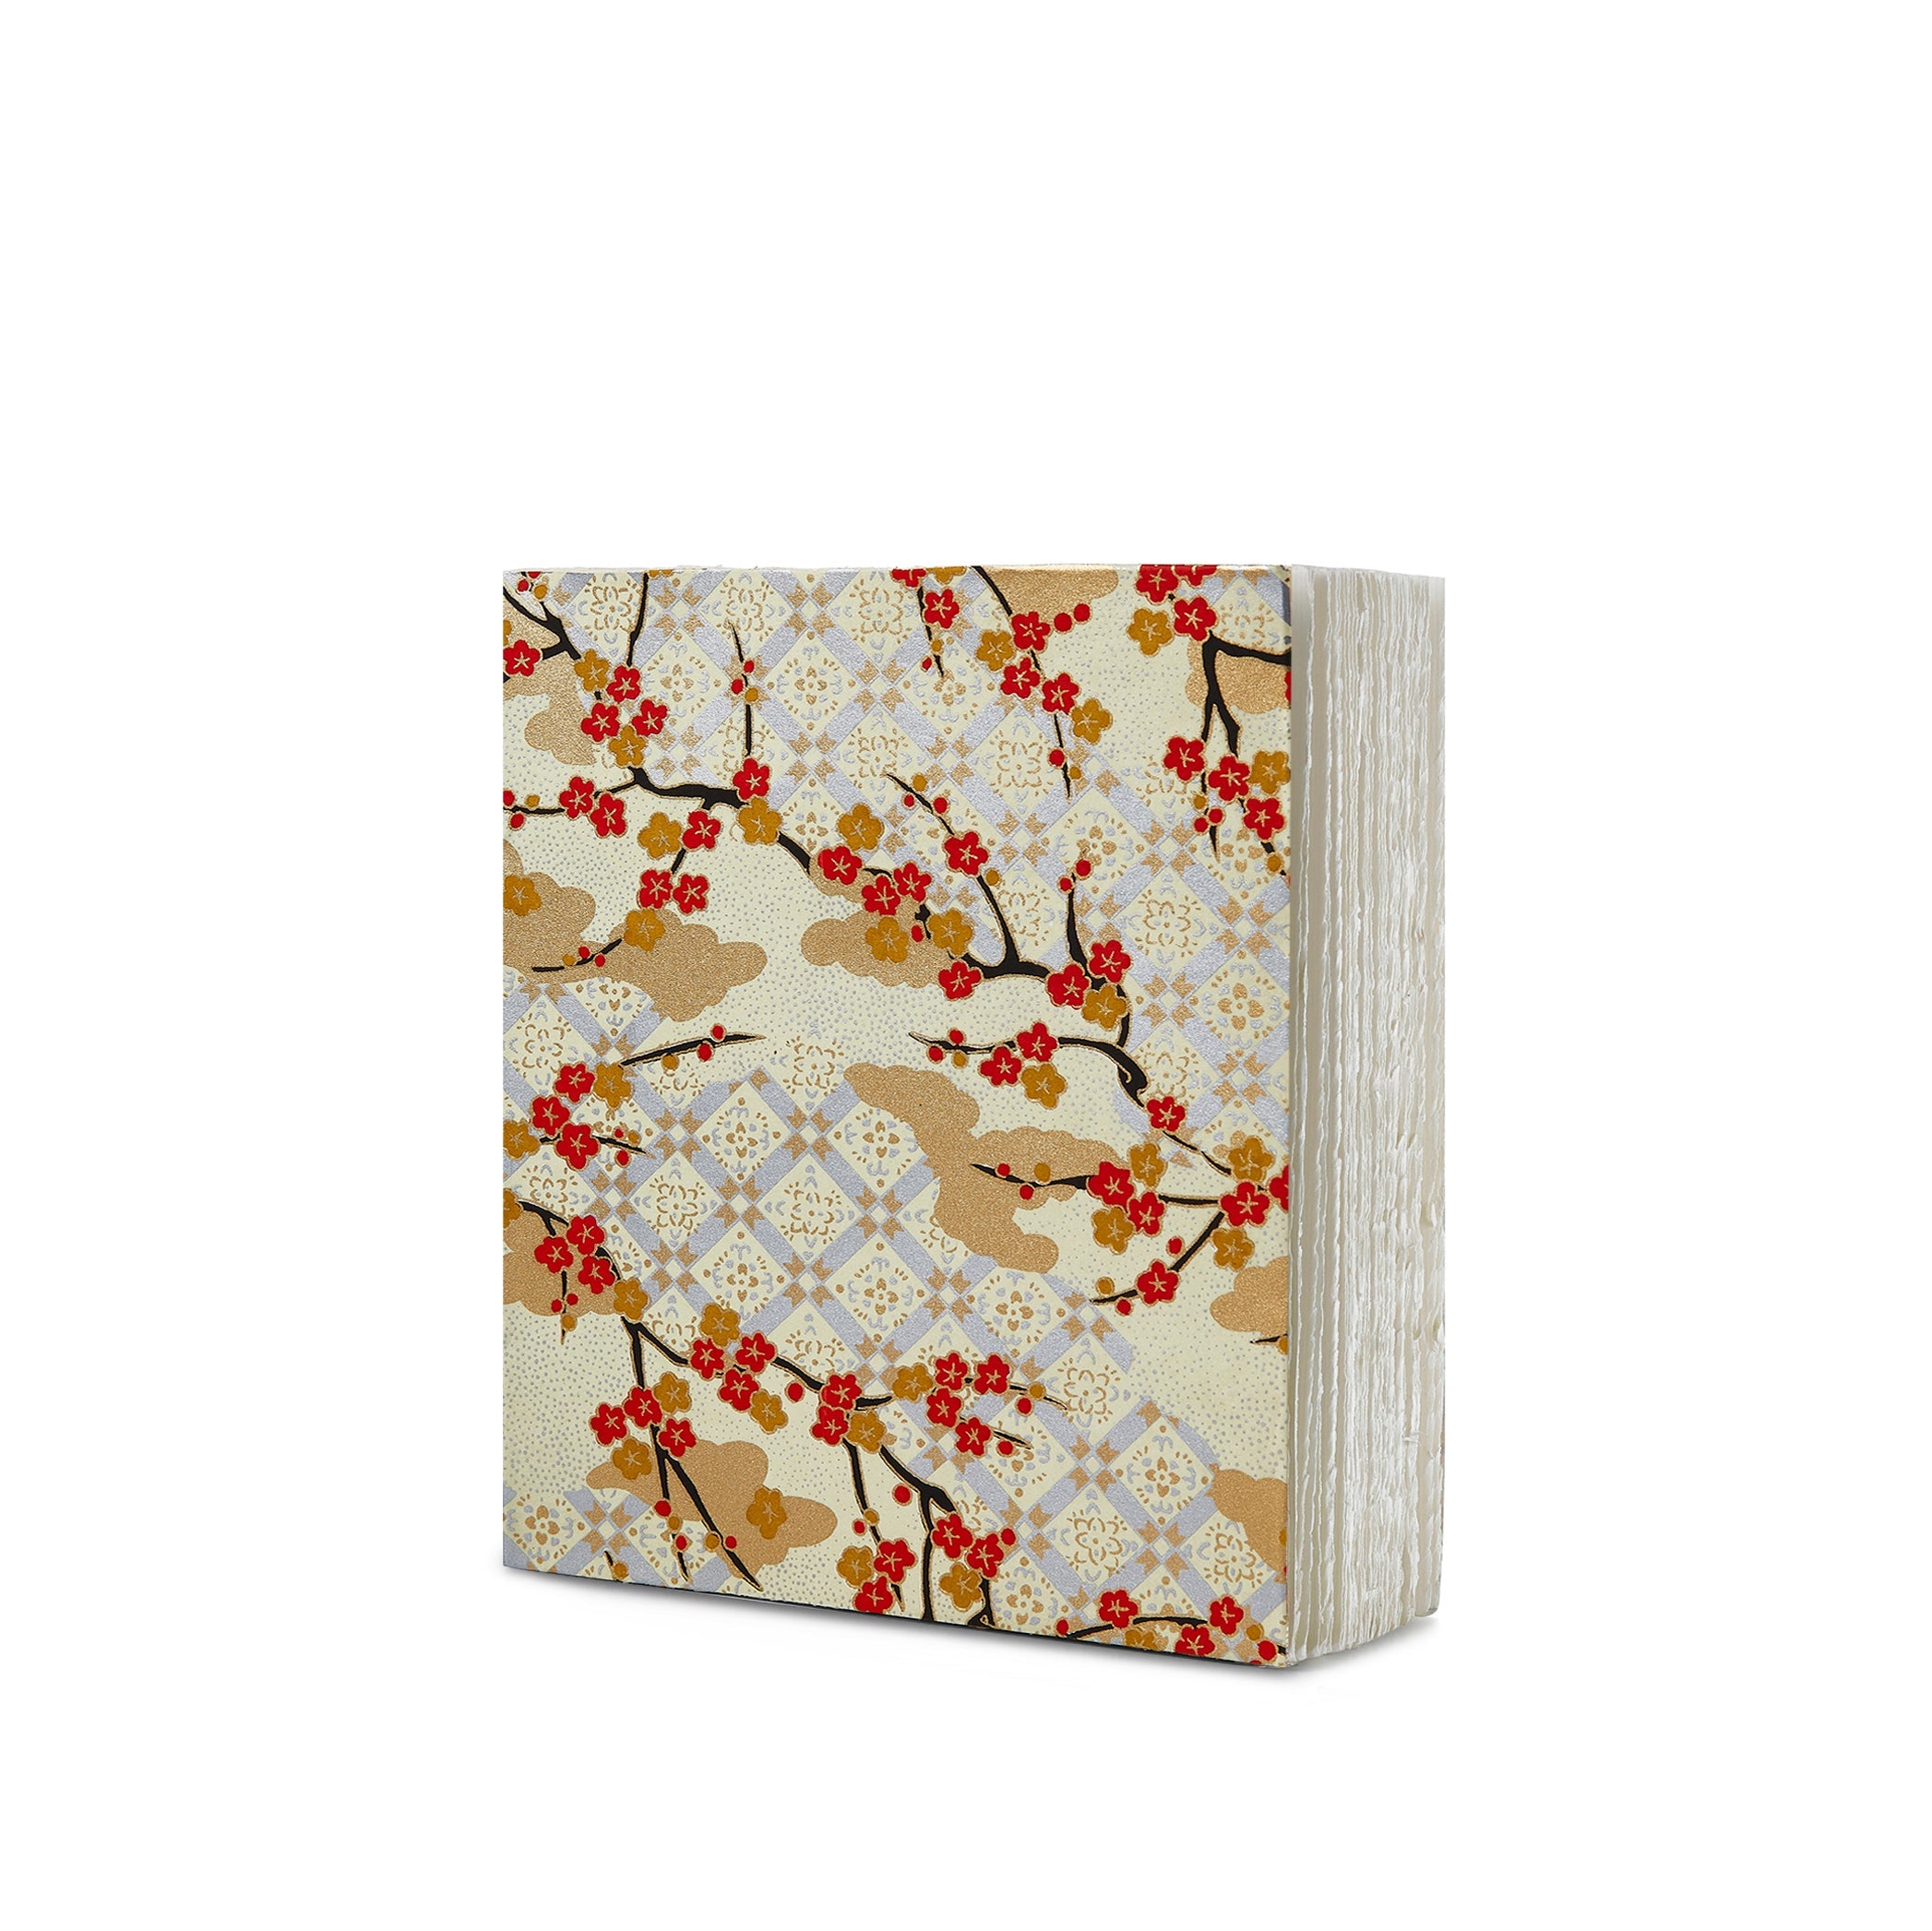 Handprinted Japanese Chiyogami Covered Sketchbook, Flowering Branches on Gold Background, 20cm x 17cm